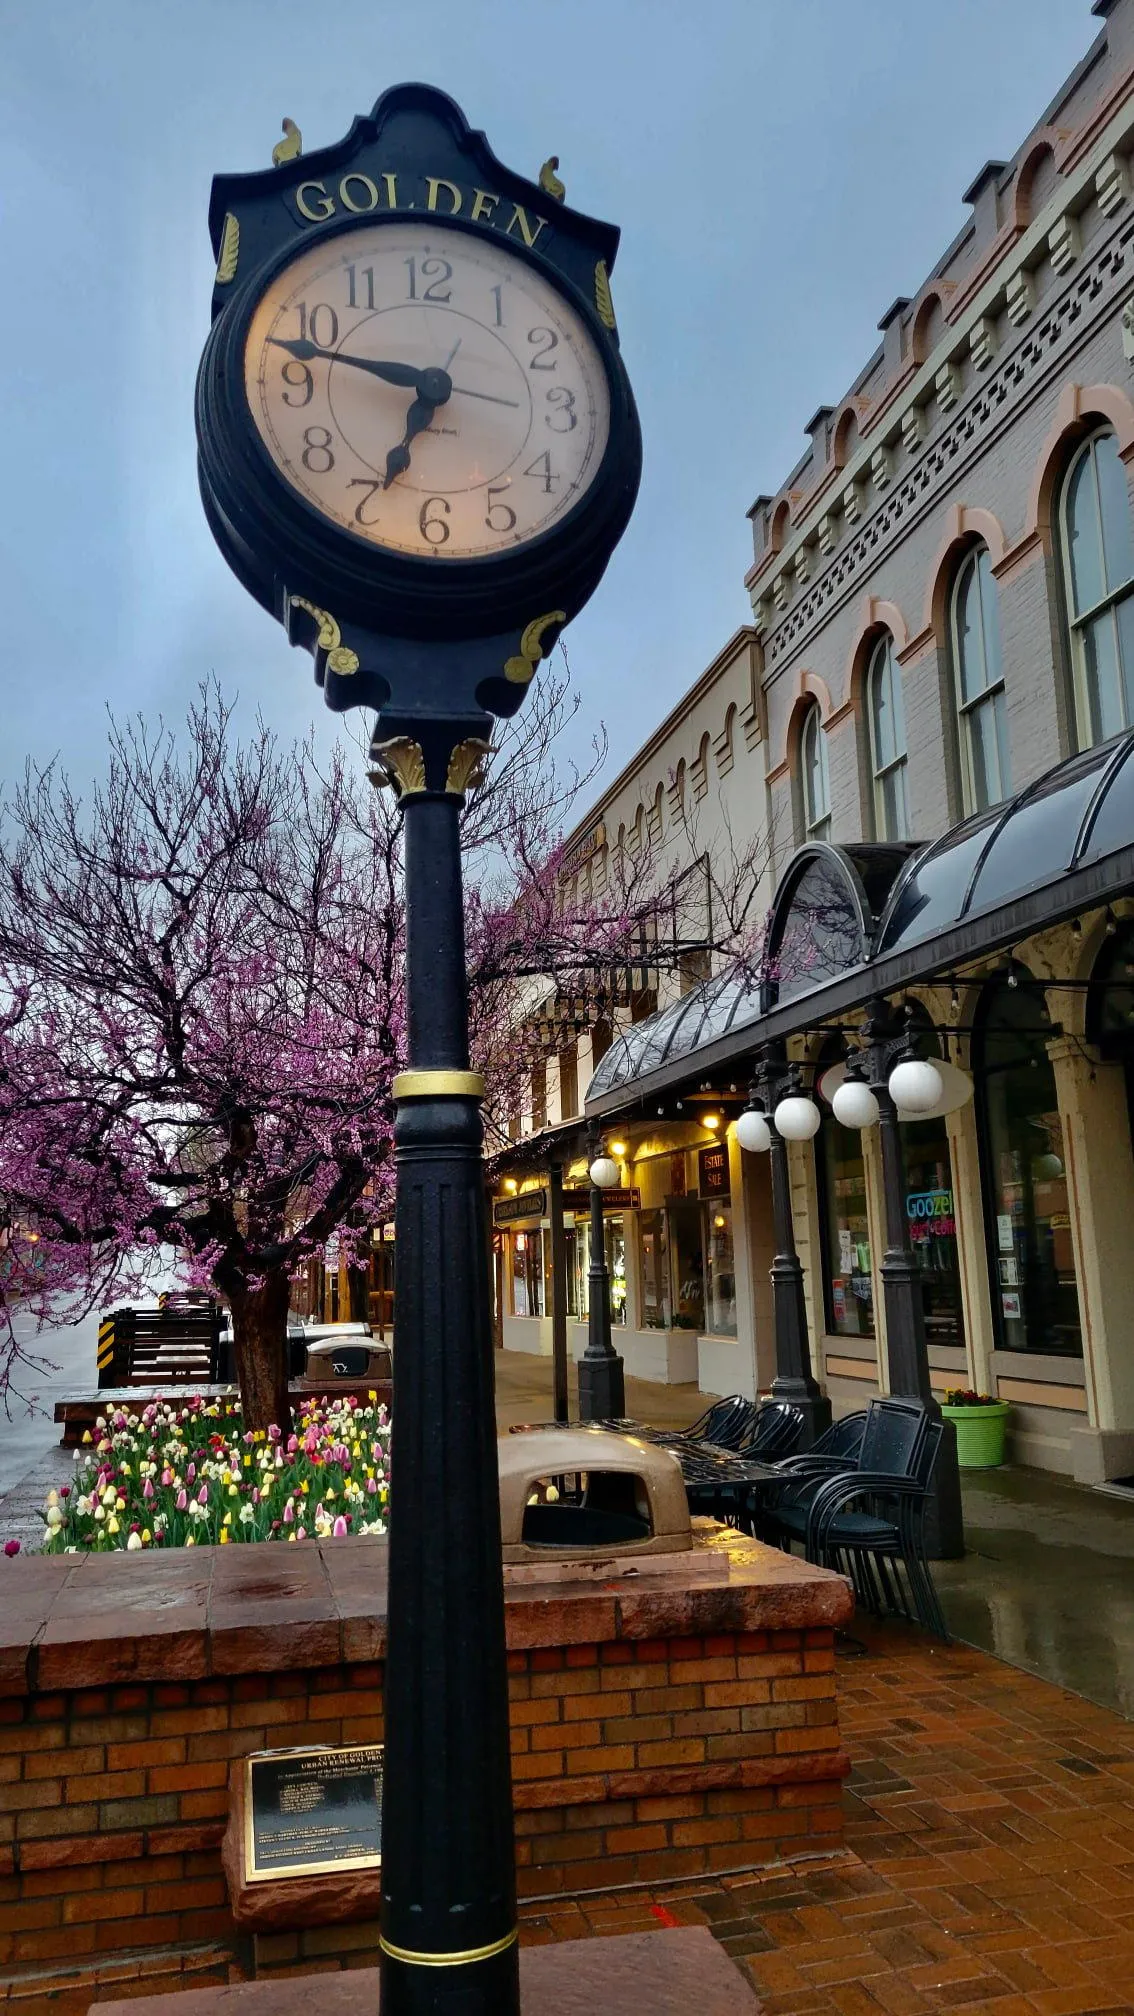 Tall, ornate clock at the corner of 12th and Washington.  Planter box with tulips and pink flowering tree in background.